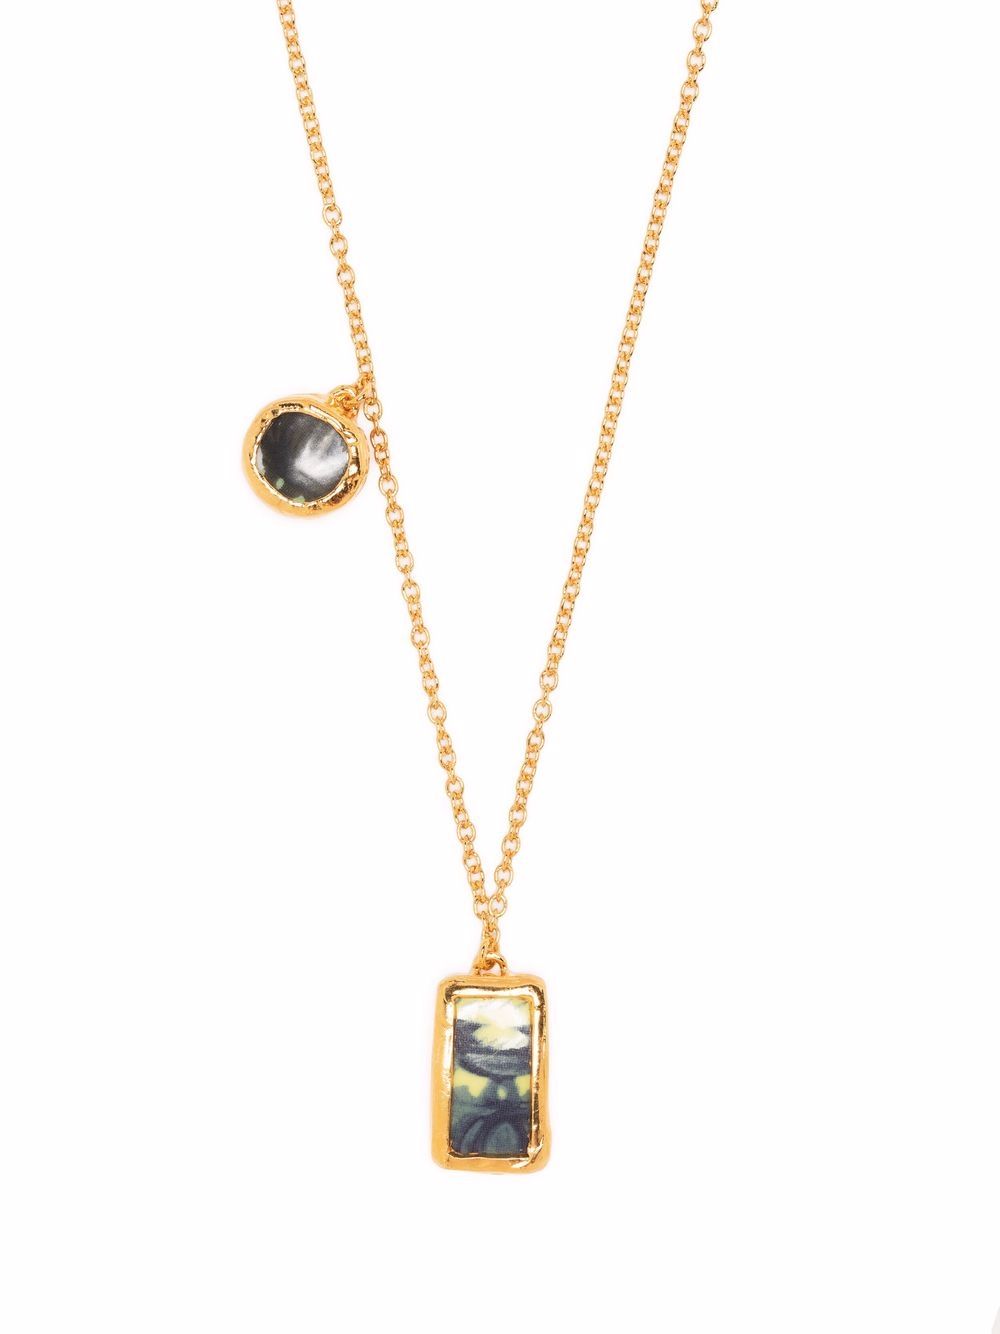 фото Nick fouquet charm chain necklace